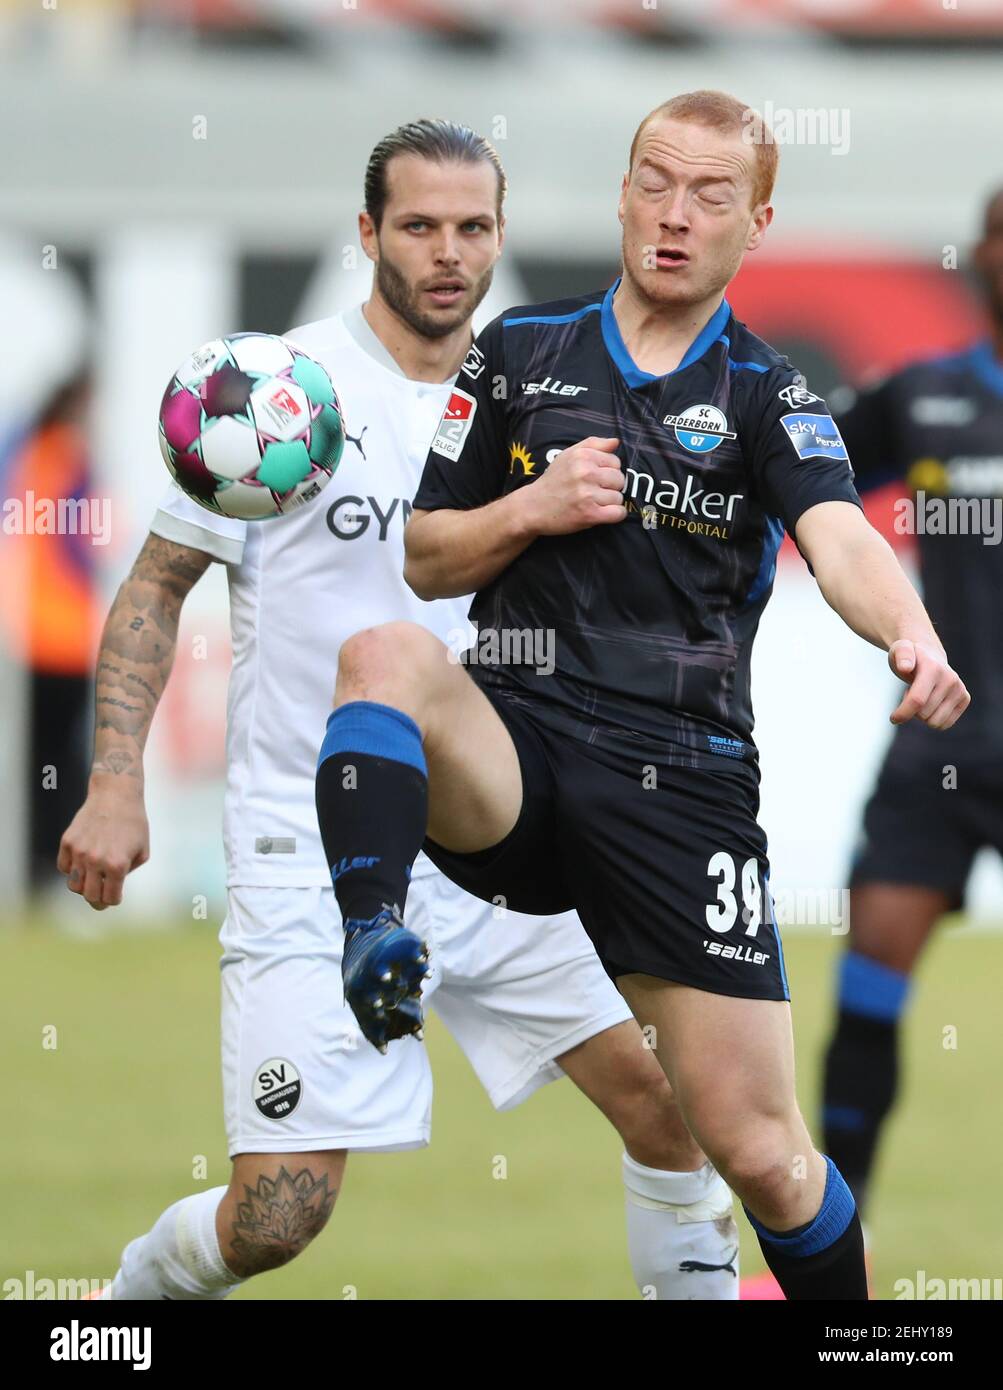 Paderborn, Germany. 20th Feb, 2021. Football: 2. Bundesliga, SC Paderborn 07 - SV Sandhausen, Matchday 22 at Benteler-Arena. Paderborn's Sebastian Vasiliadis (r) fights for the ball with Dennis Diekmeier (l) from Sandhausen. Credit: Friso Gentsch/dpa - IMPORTANT NOTE: In accordance with the regulations of the DFL Deutsche Fußball Liga and/or the DFB Deutscher Fußball-Bund, it is prohibited to use or have used photographs taken in the stadium and/or of the match in the form of sequence pictures and/or video-like photo series./dpa/Alamy Live News Stock Photo